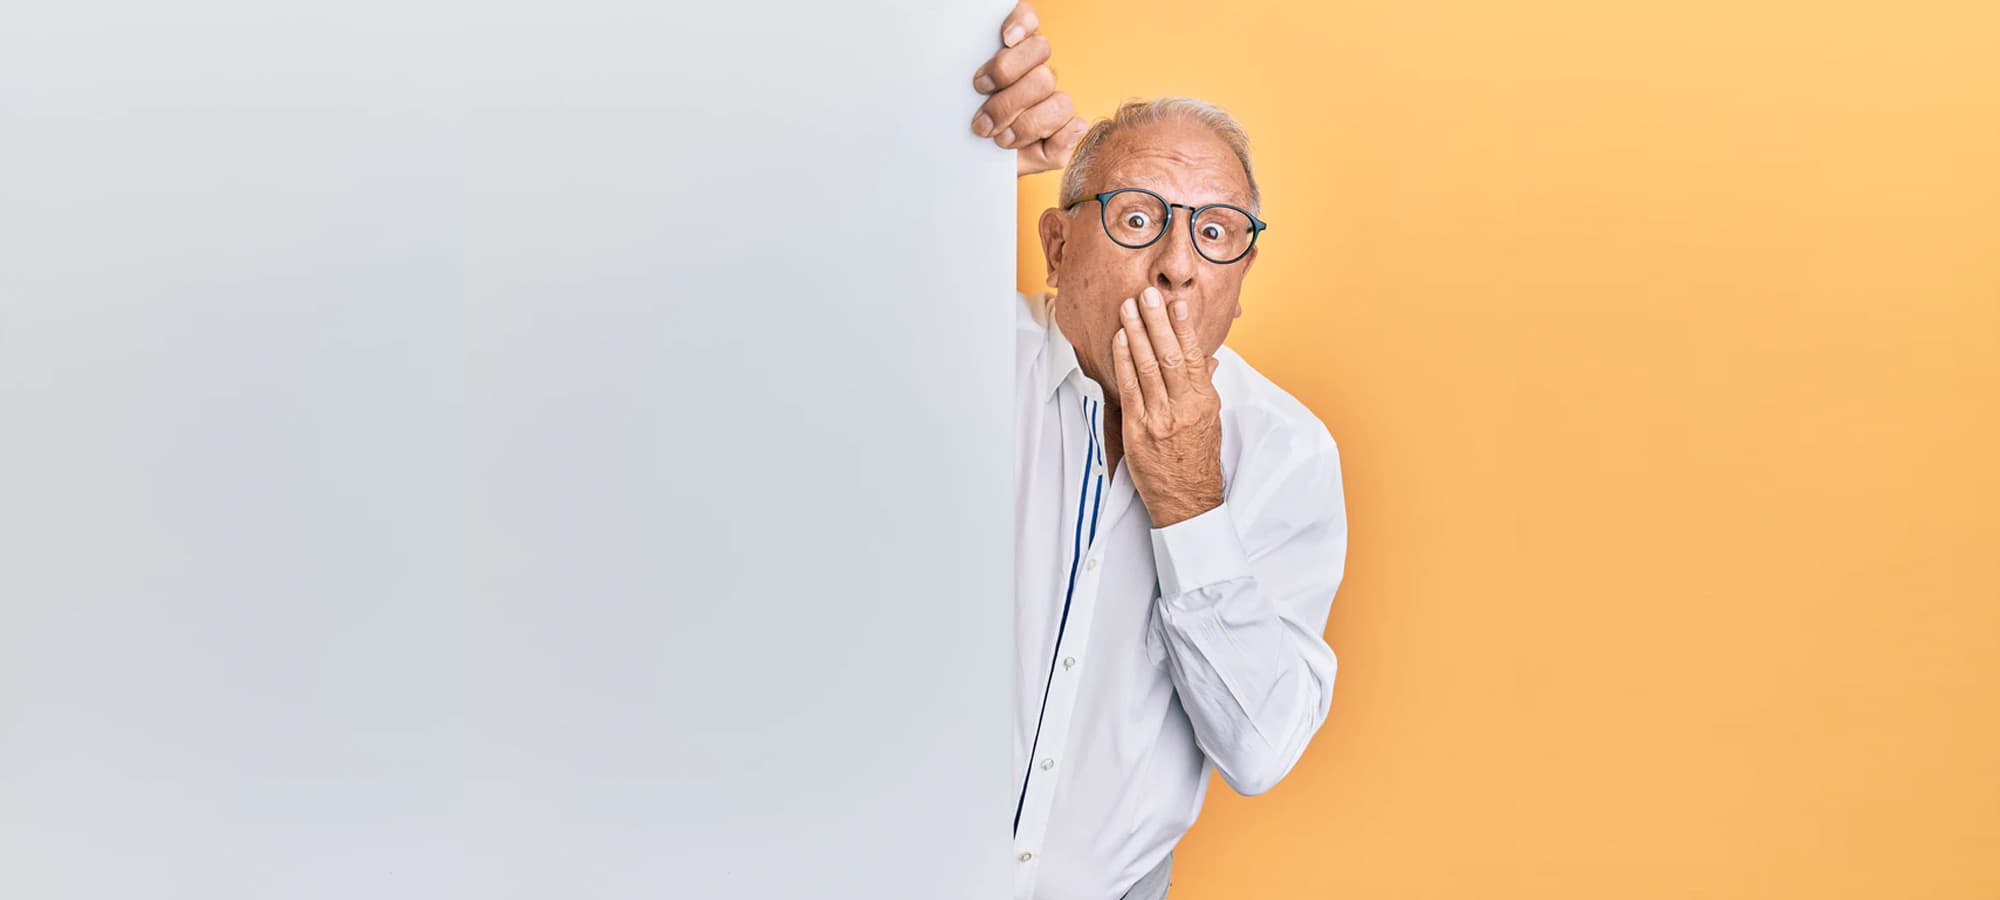 An elderly man wearing glasses peeks out from behind a wal